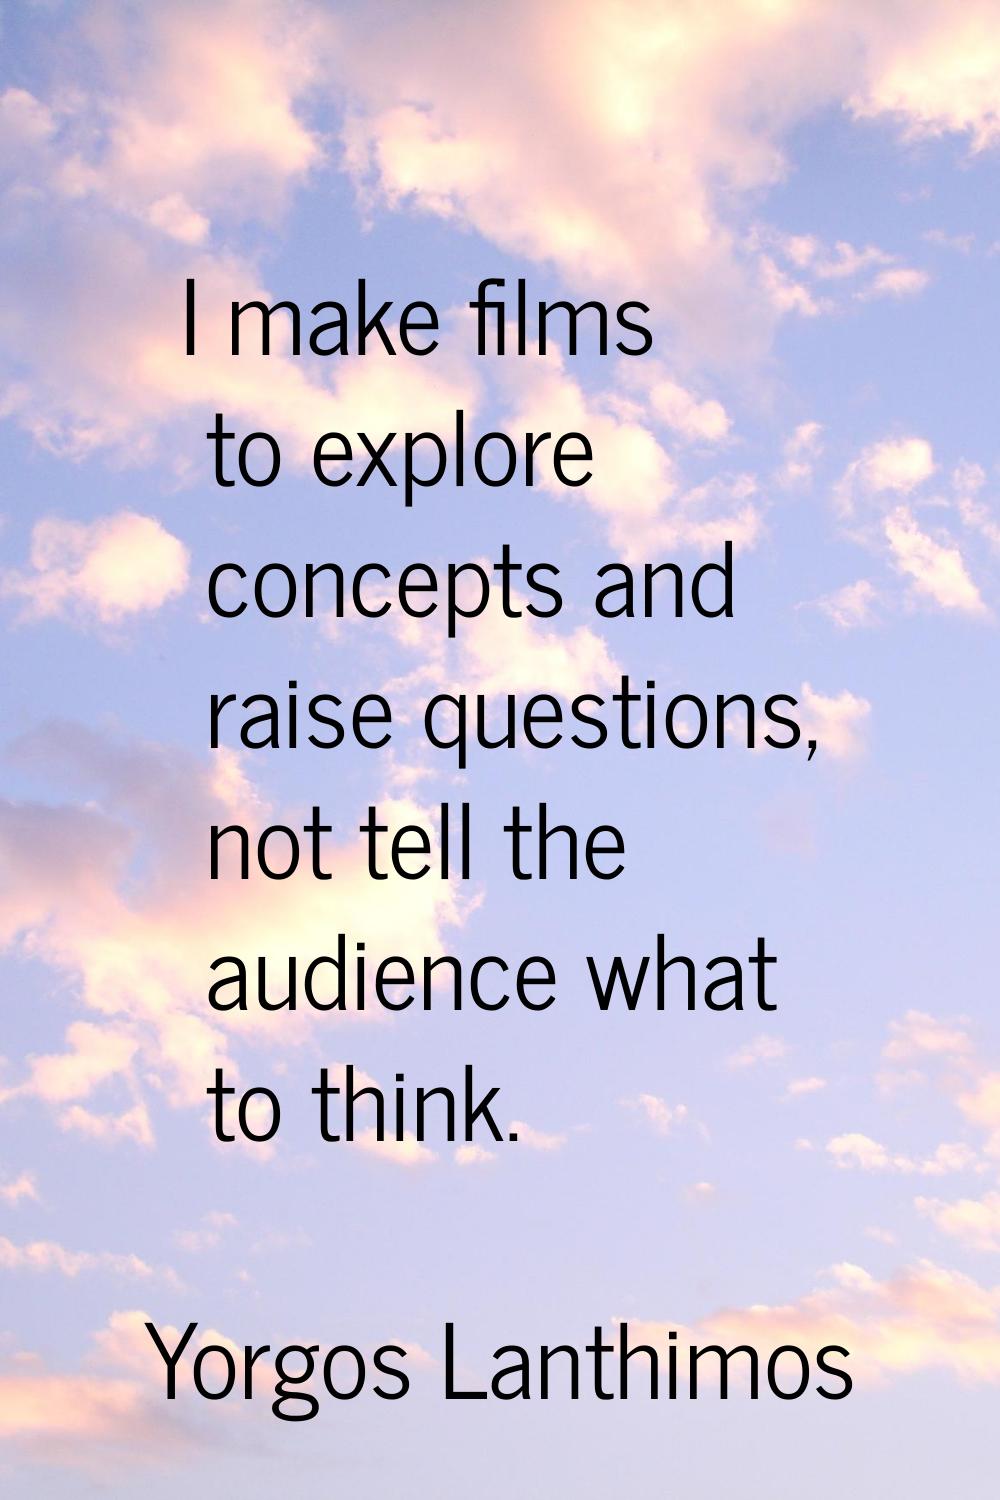 I make films to explore concepts and raise questions, not tell the audience what to think.